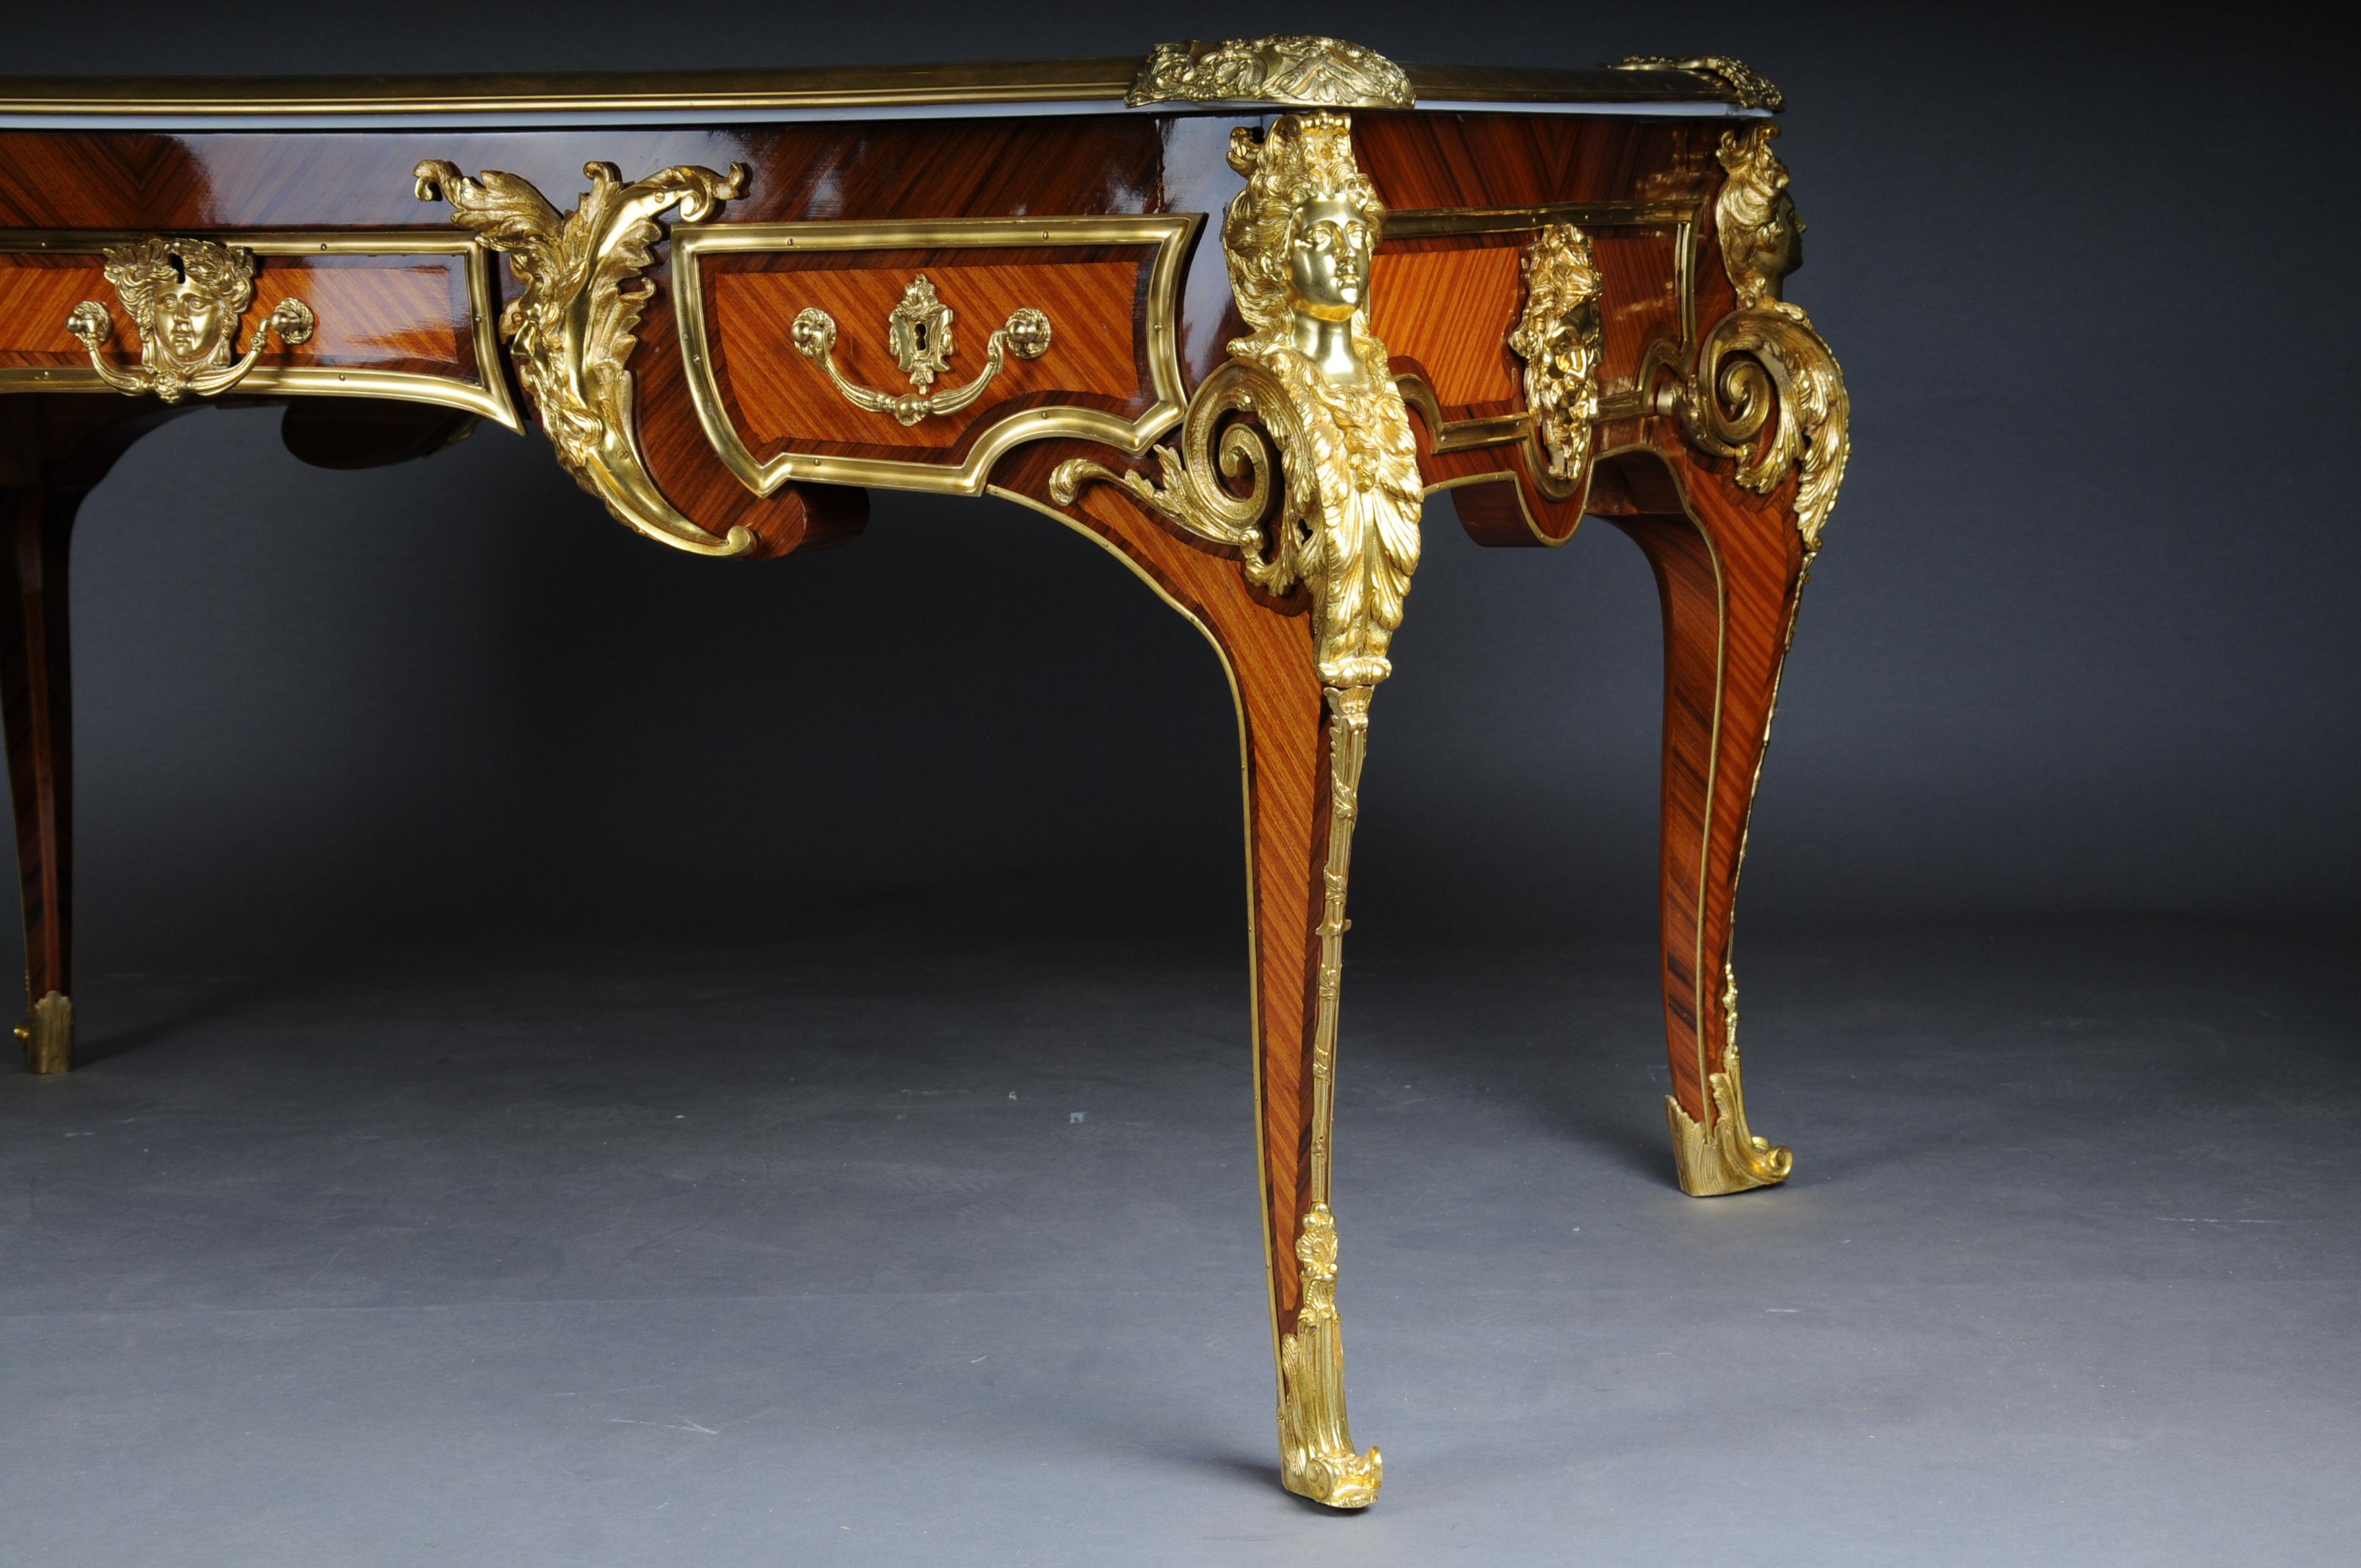 20th Century Bureau Plat or Desk by the Model of Andre Charles Boulle In Good Condition For Sale In Berlin, DE